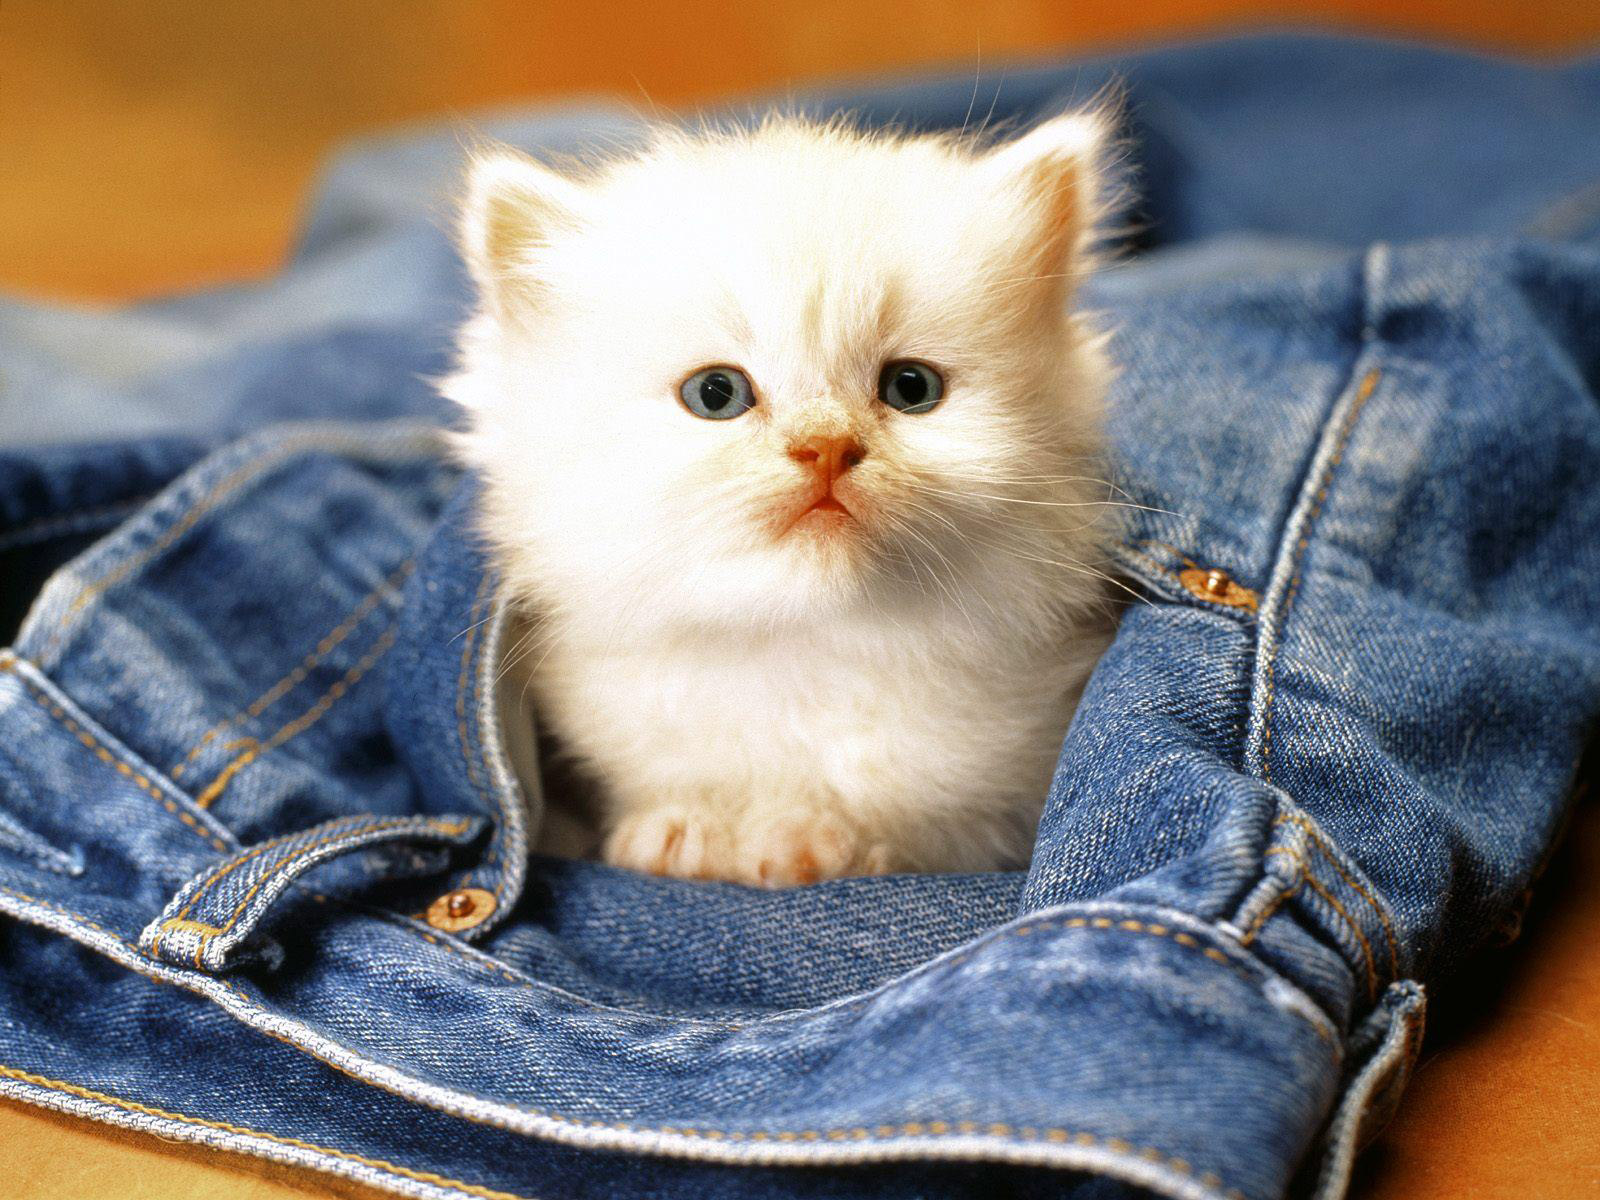 http://www.weesk.com/wallpaper/animaux/chats-chatons/tout-mignon-chats-chatons-animaux.jpeg